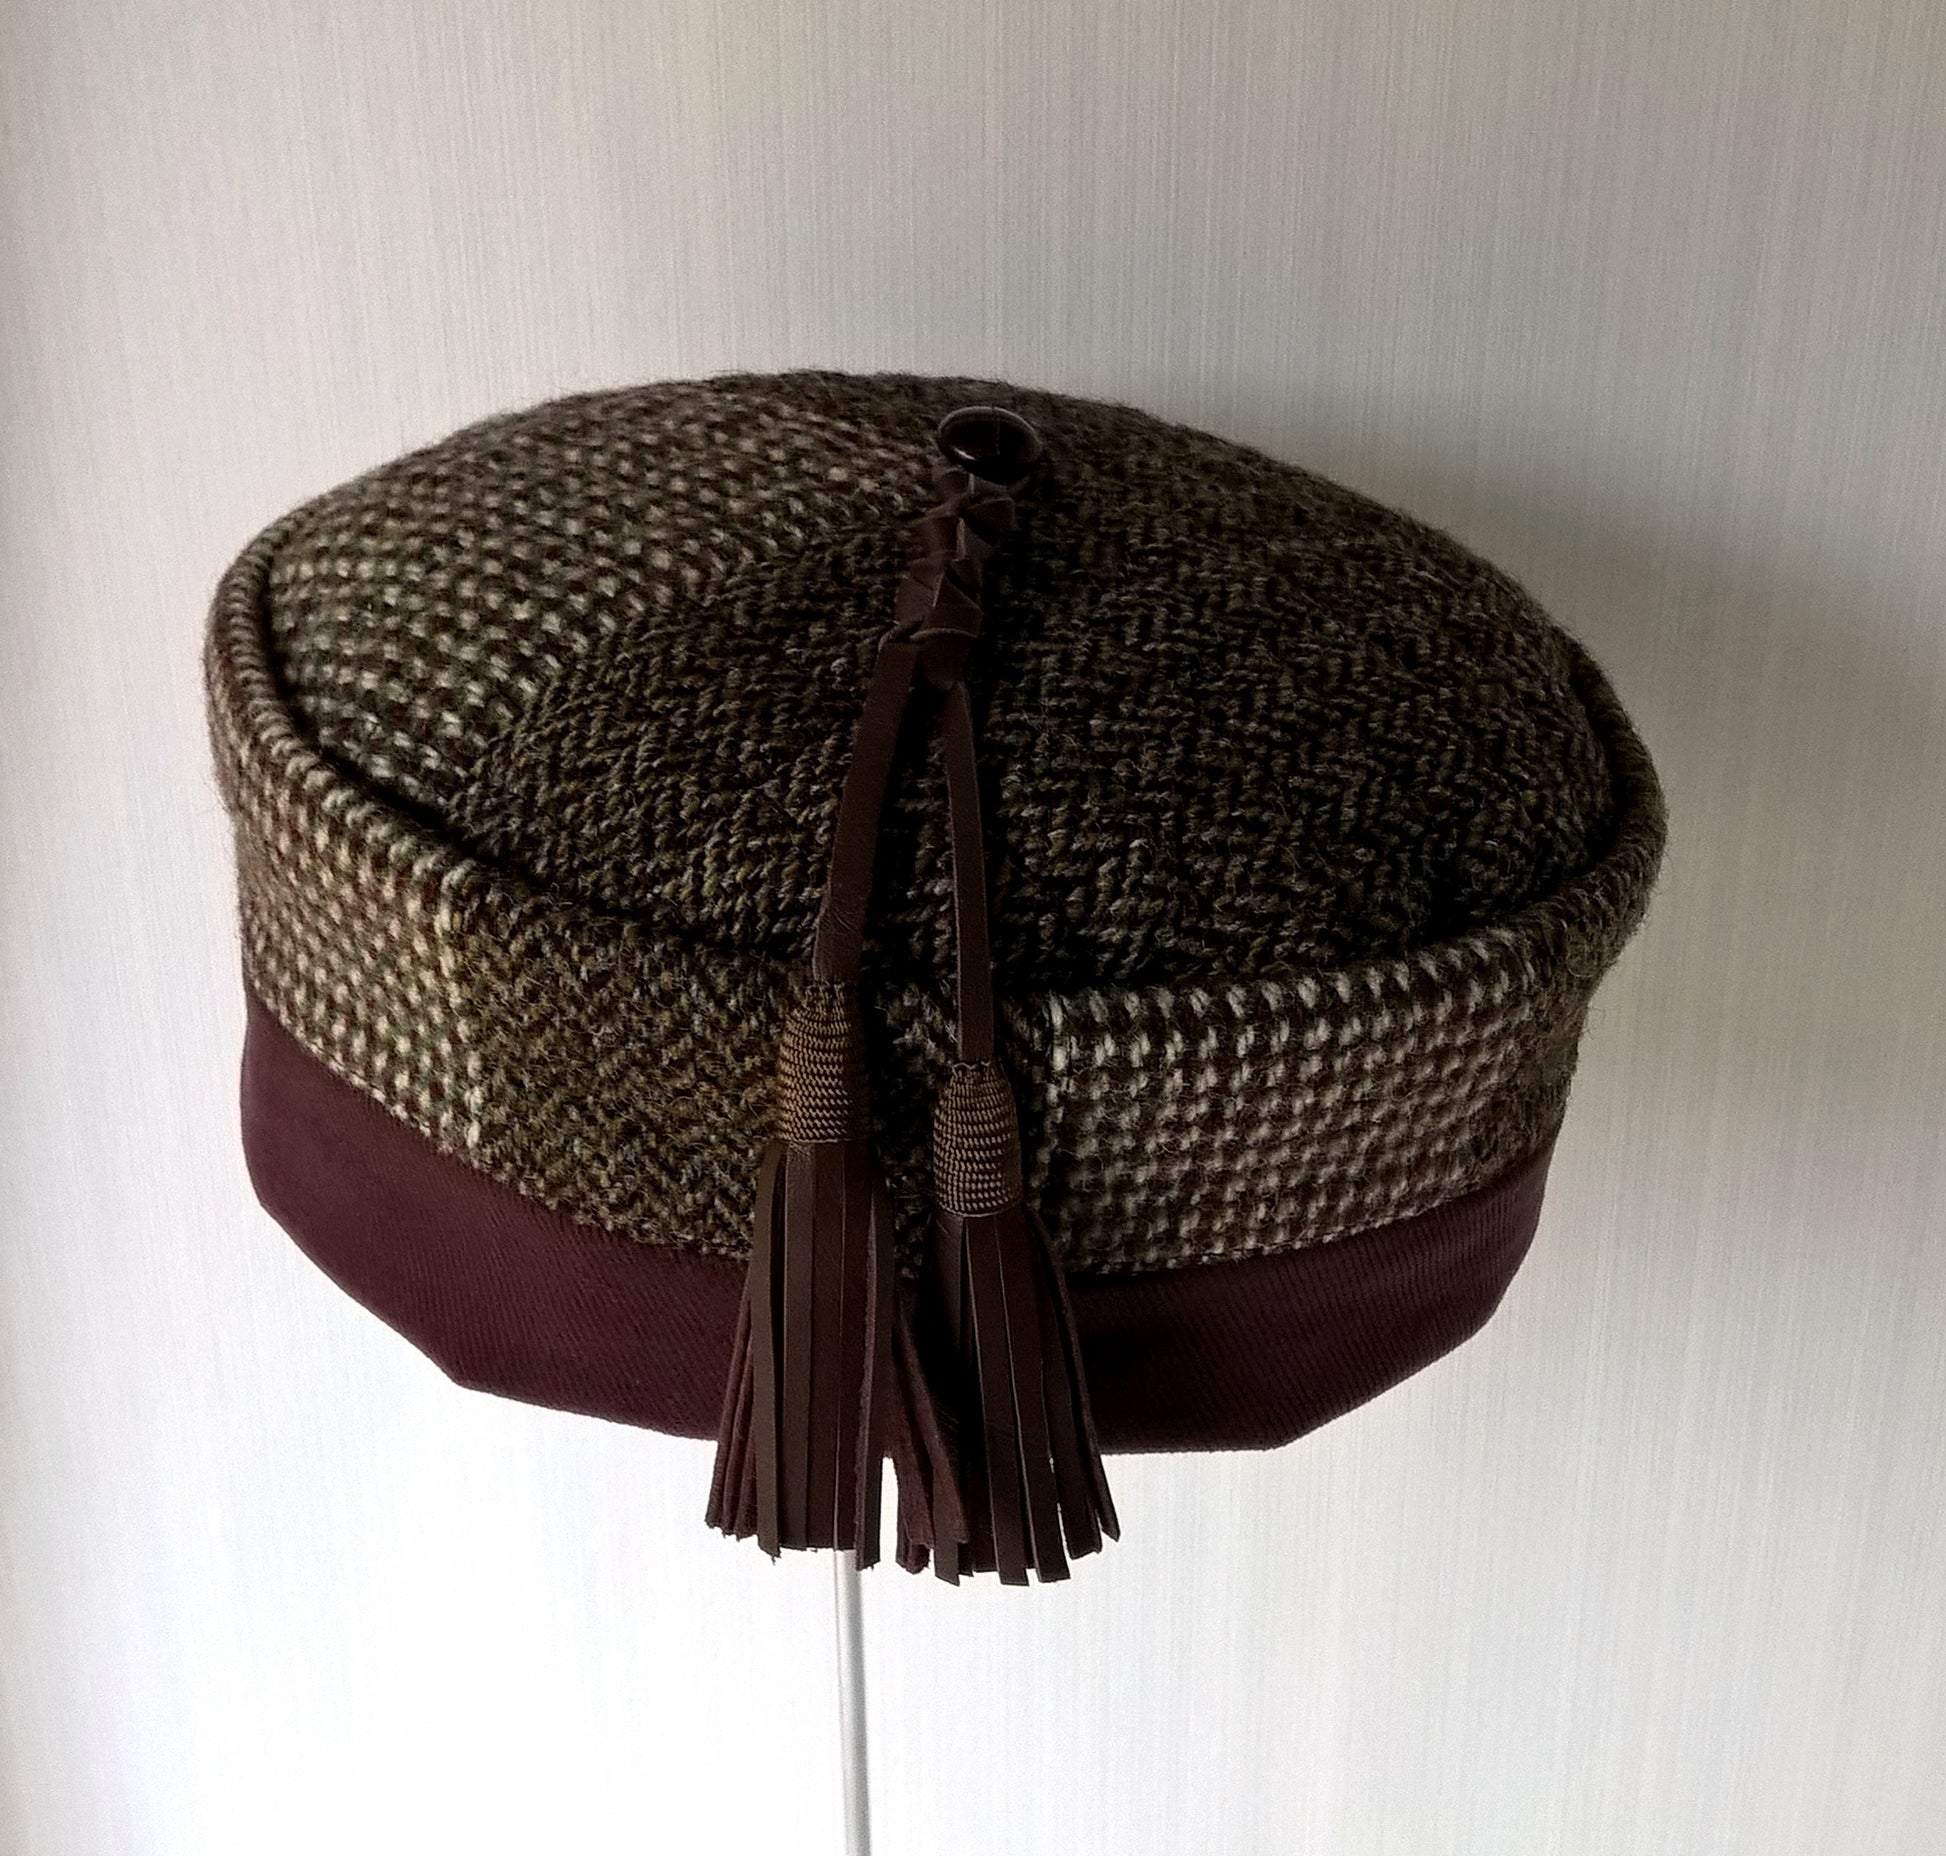 Handcrafted wool fez with mismatched Harris Tweed and removable leather tassel